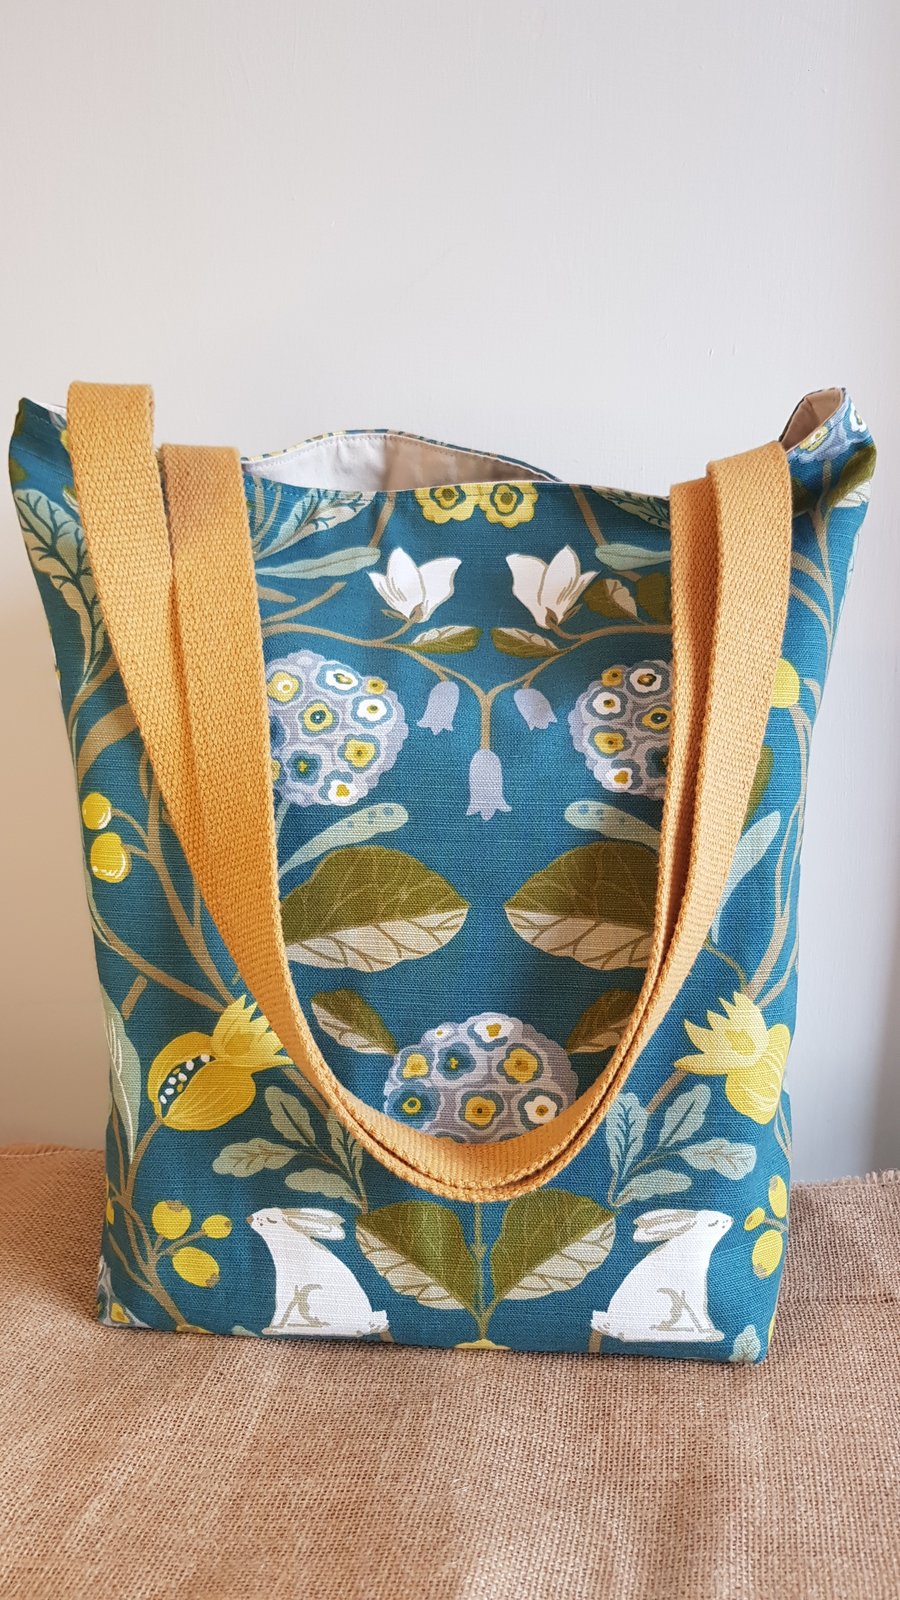 Tote bag with long handles: teal floral & white rabbits